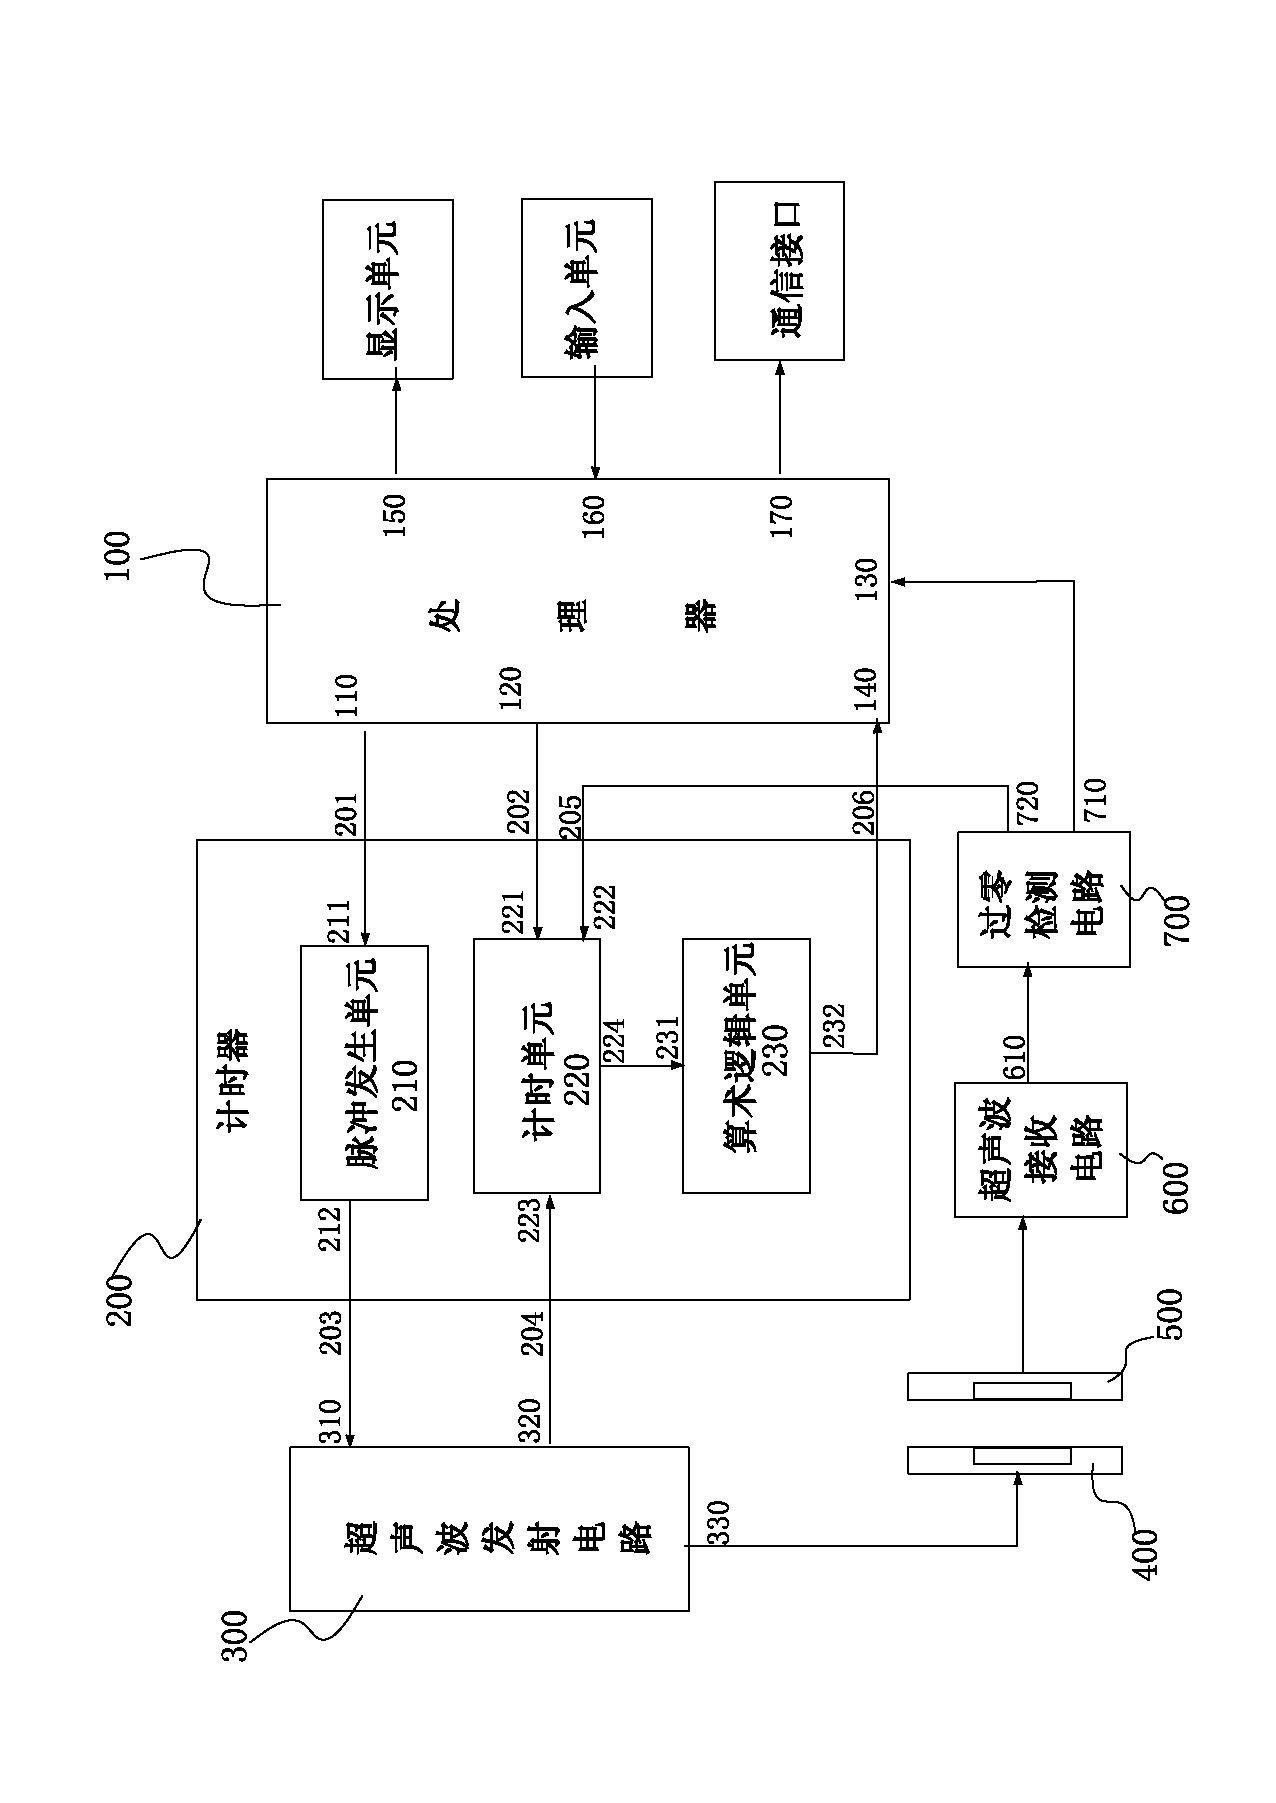 On-line relative blood volume detection device and detection method